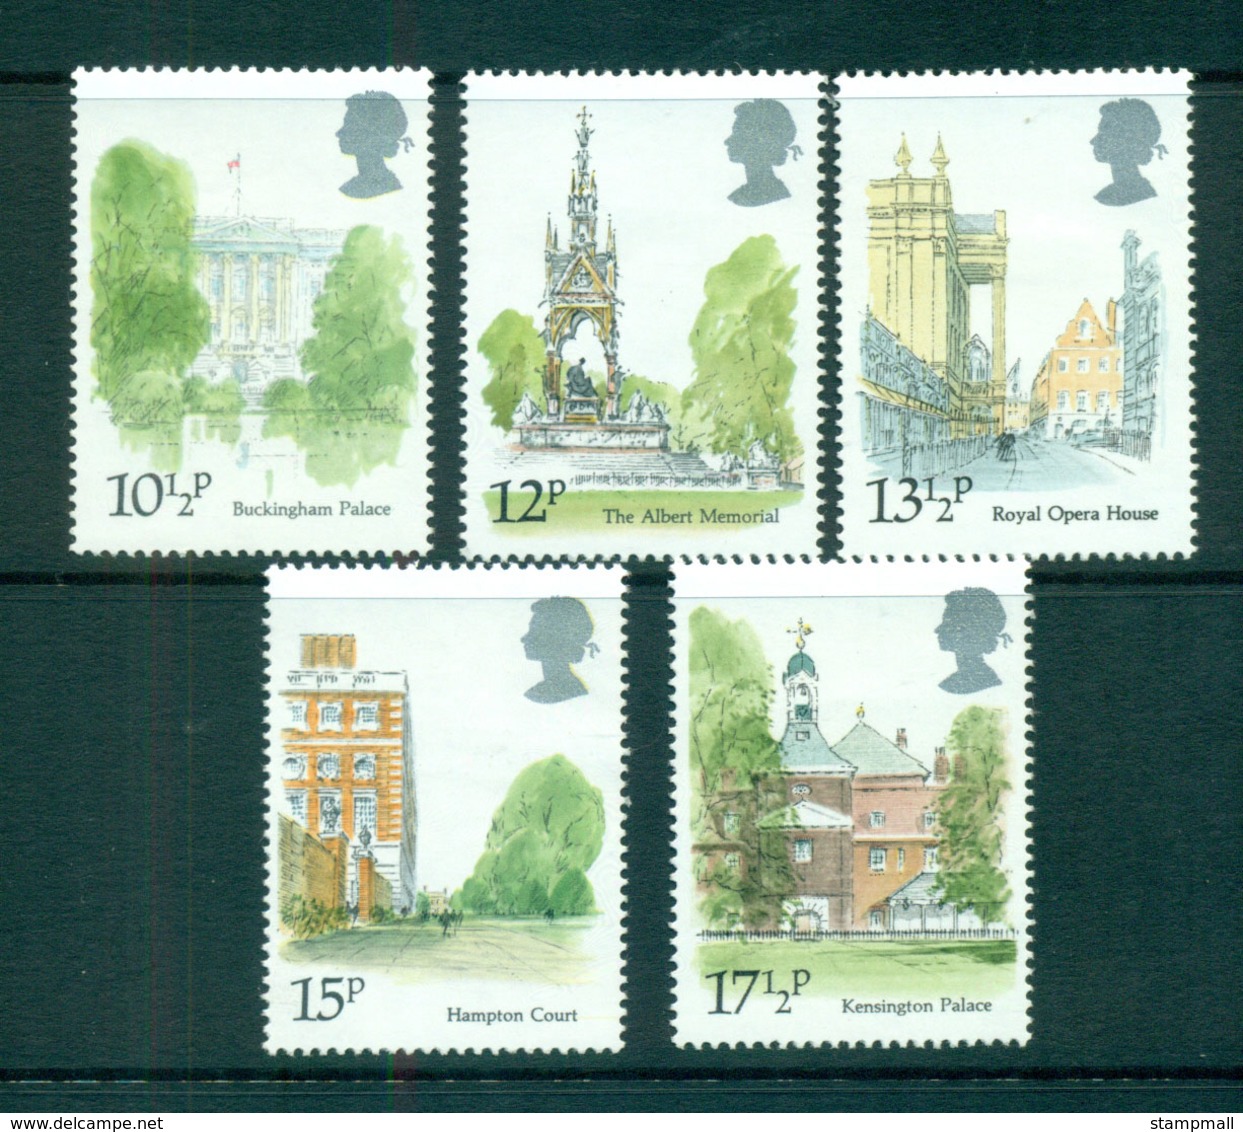 GB 1980 British Palaces MLH Lot53289 - Unclassified